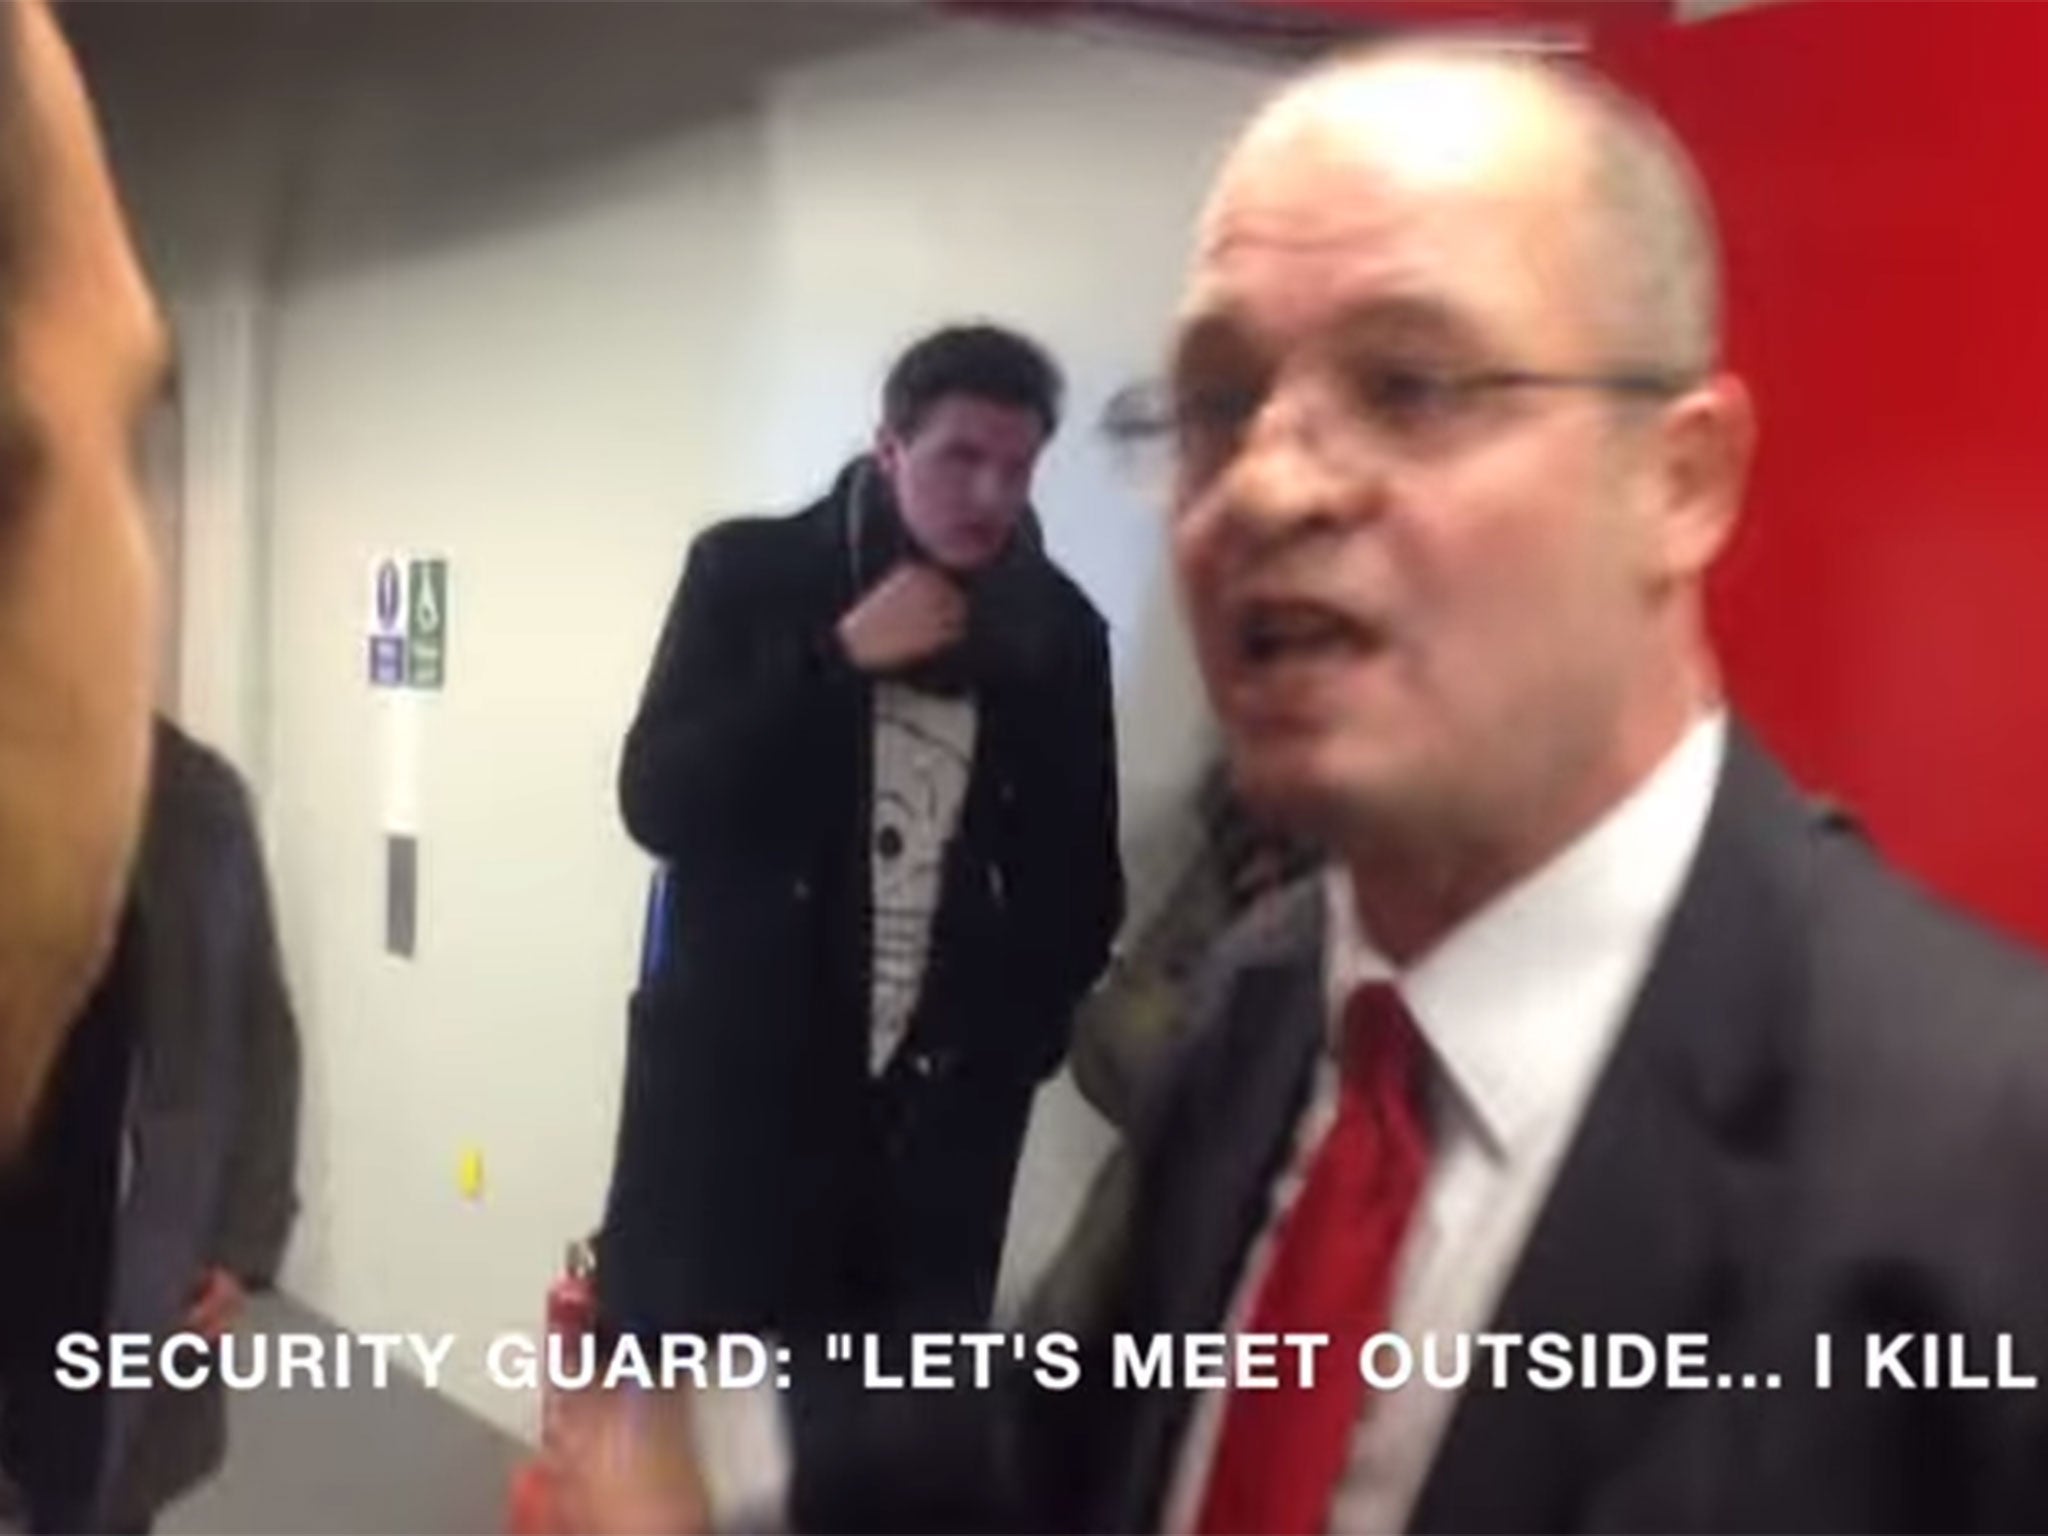 The security guard was filmed apparently threatening students